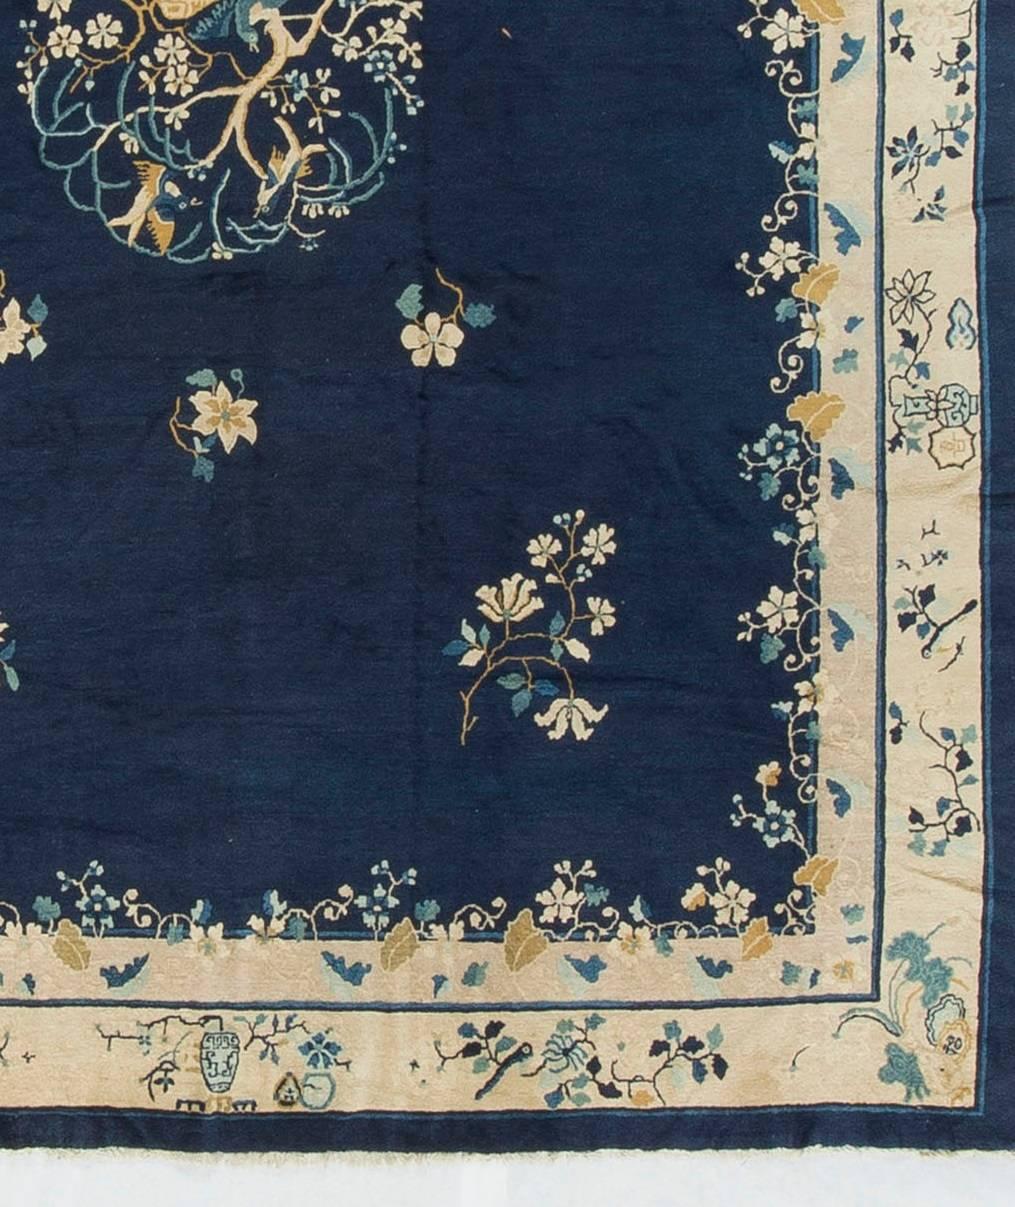 Weaving in Peking began circa 1900 during the revival of Chinese carpet manufacturing when the other weaving areas such as Ningxia moved to the capital. Peking rugs are normally minimalist with a narrow color palette and designs motivated by symbols